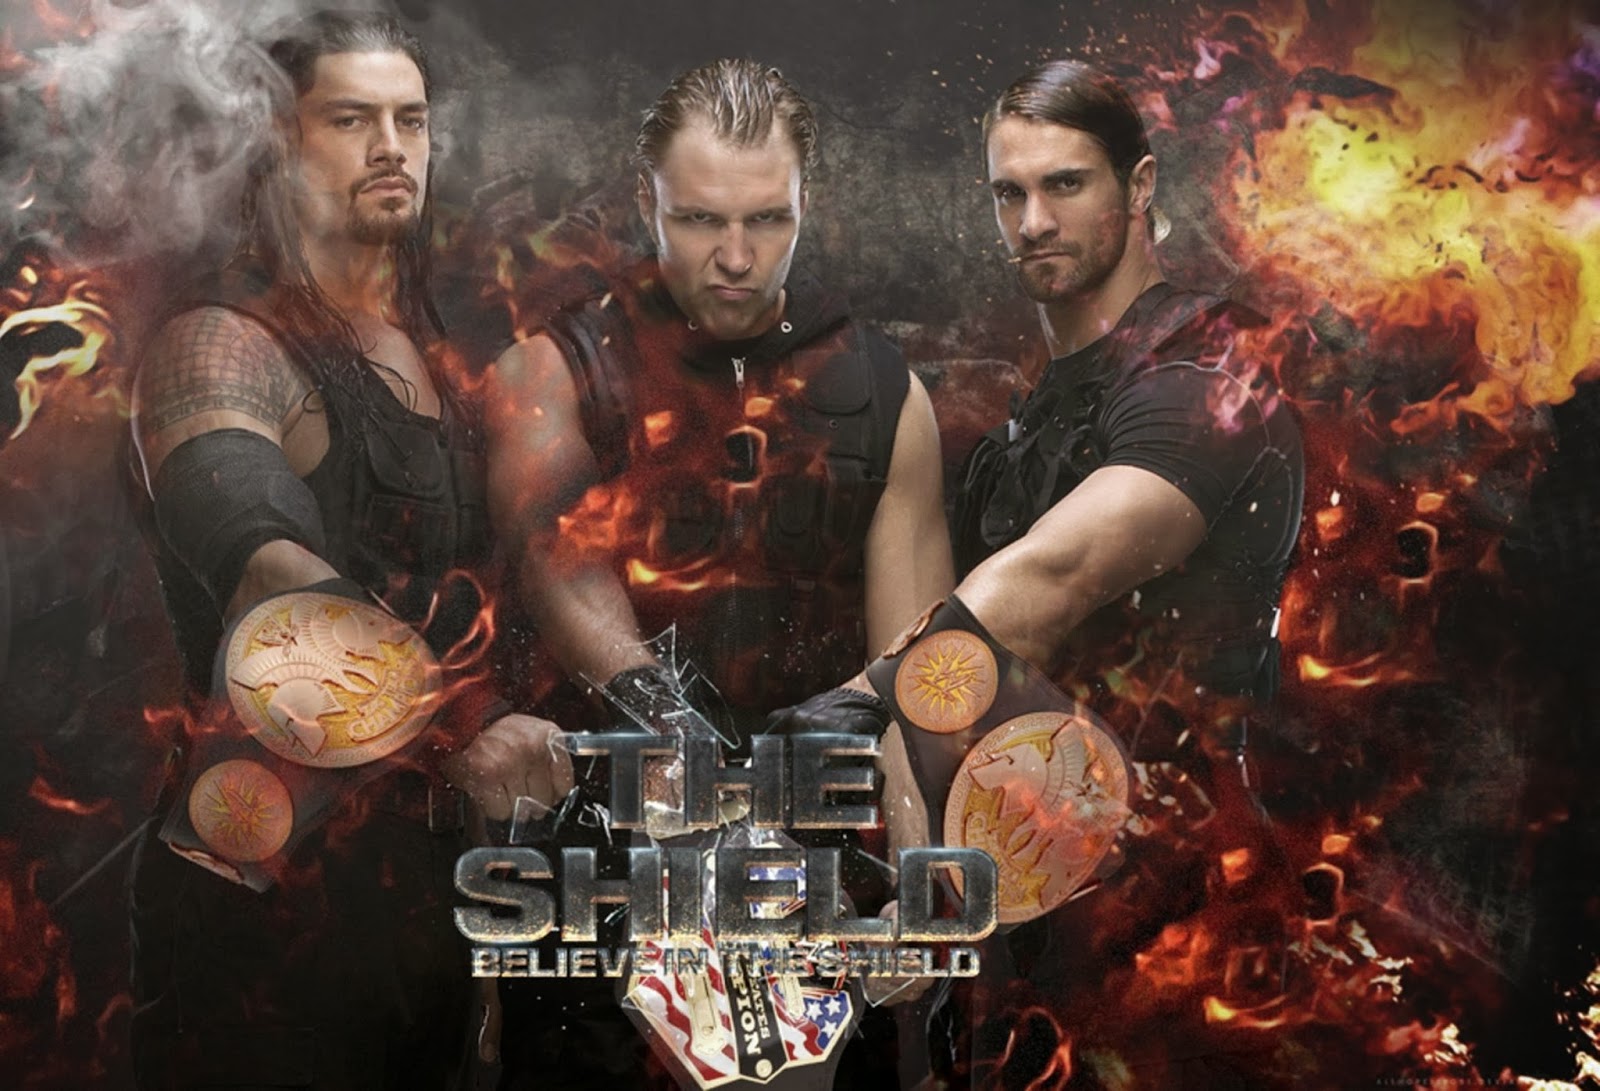 wwe the shield hd wallpaper,action adventure game,movie,games,poster,action film